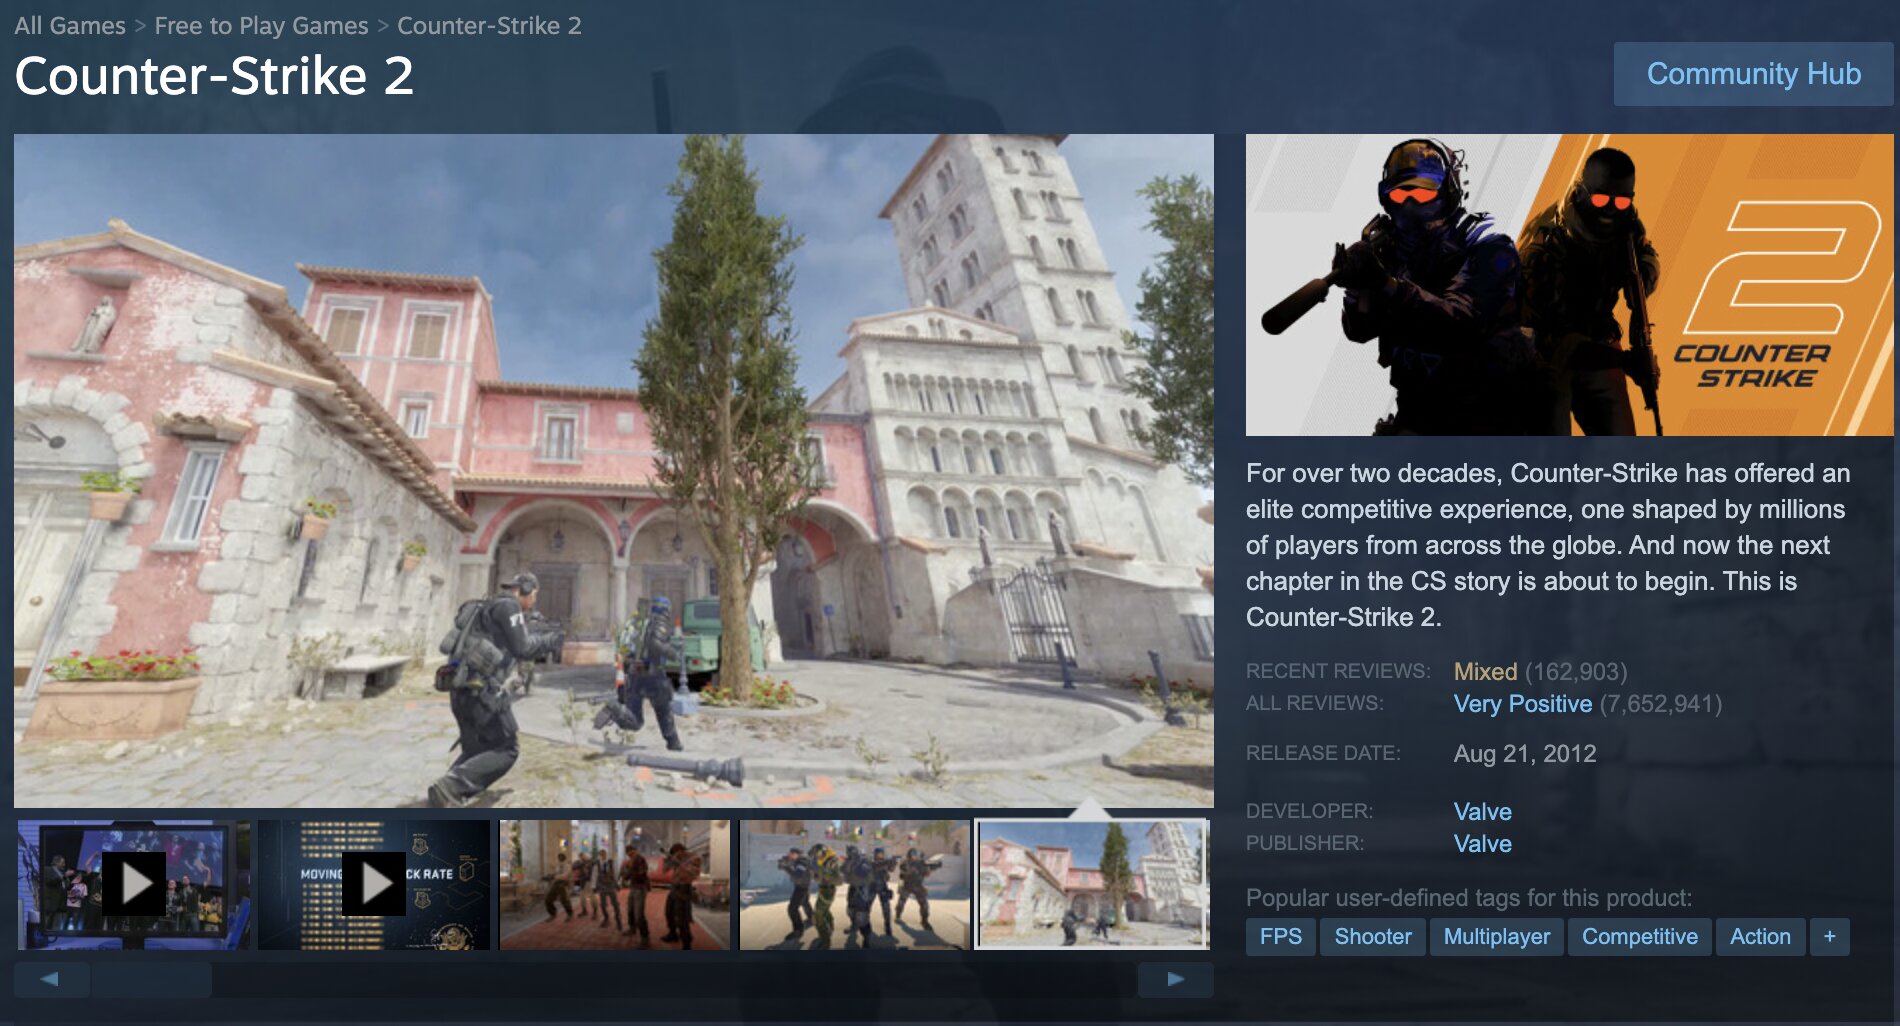 Counter-Strike 2 is live and free-to-play on Steam right now